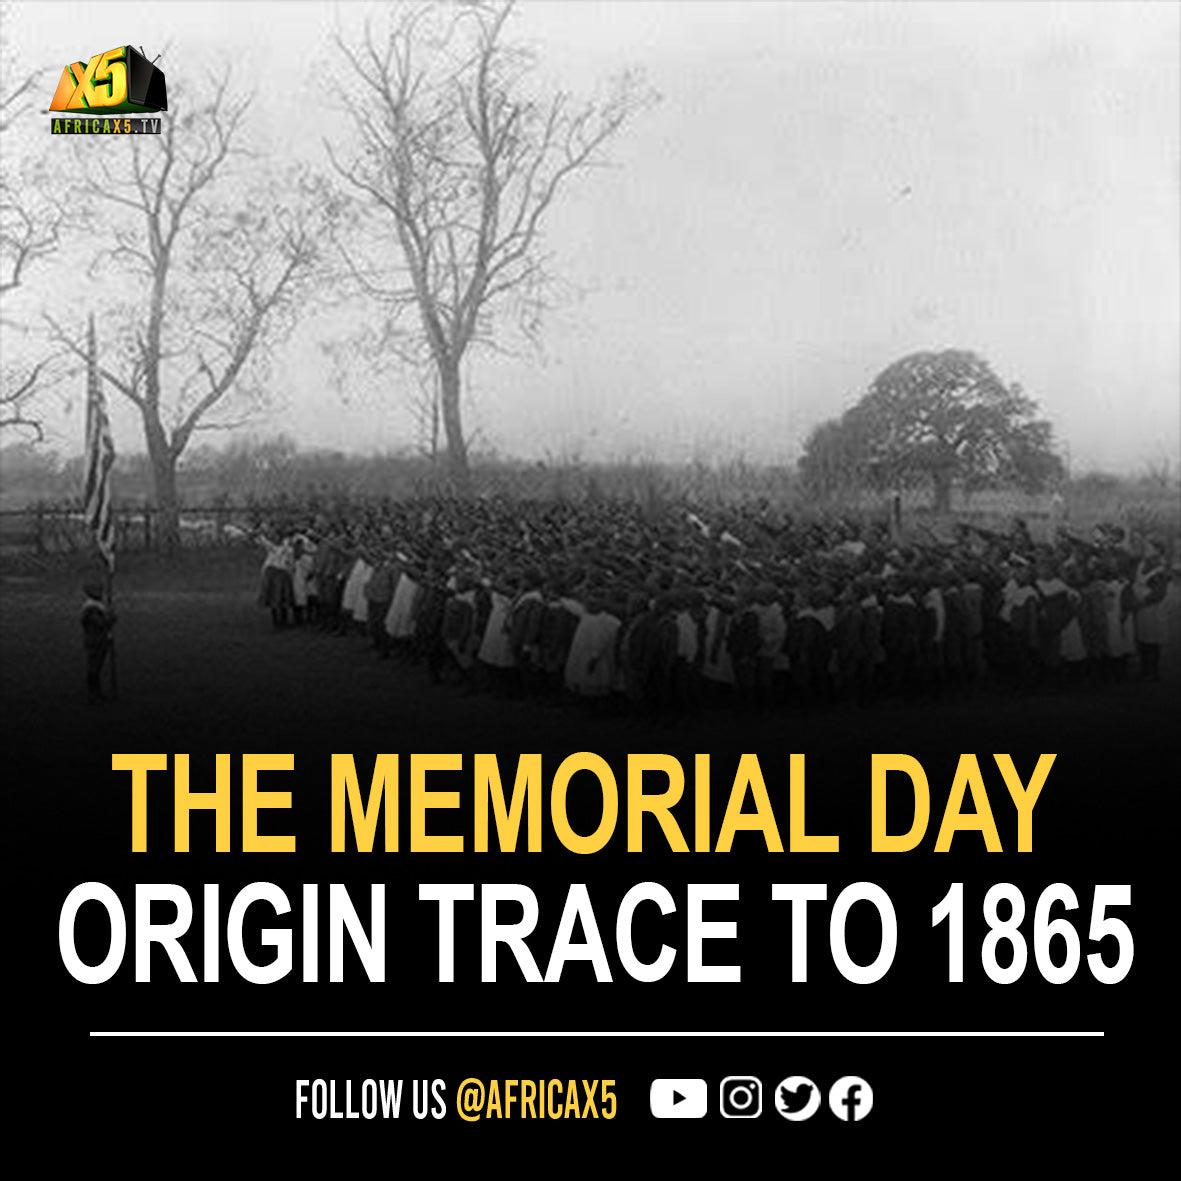 The origin of Memorial Day trace back to 1865 when freed slaves started a tradition to honor fallen Union soldiers